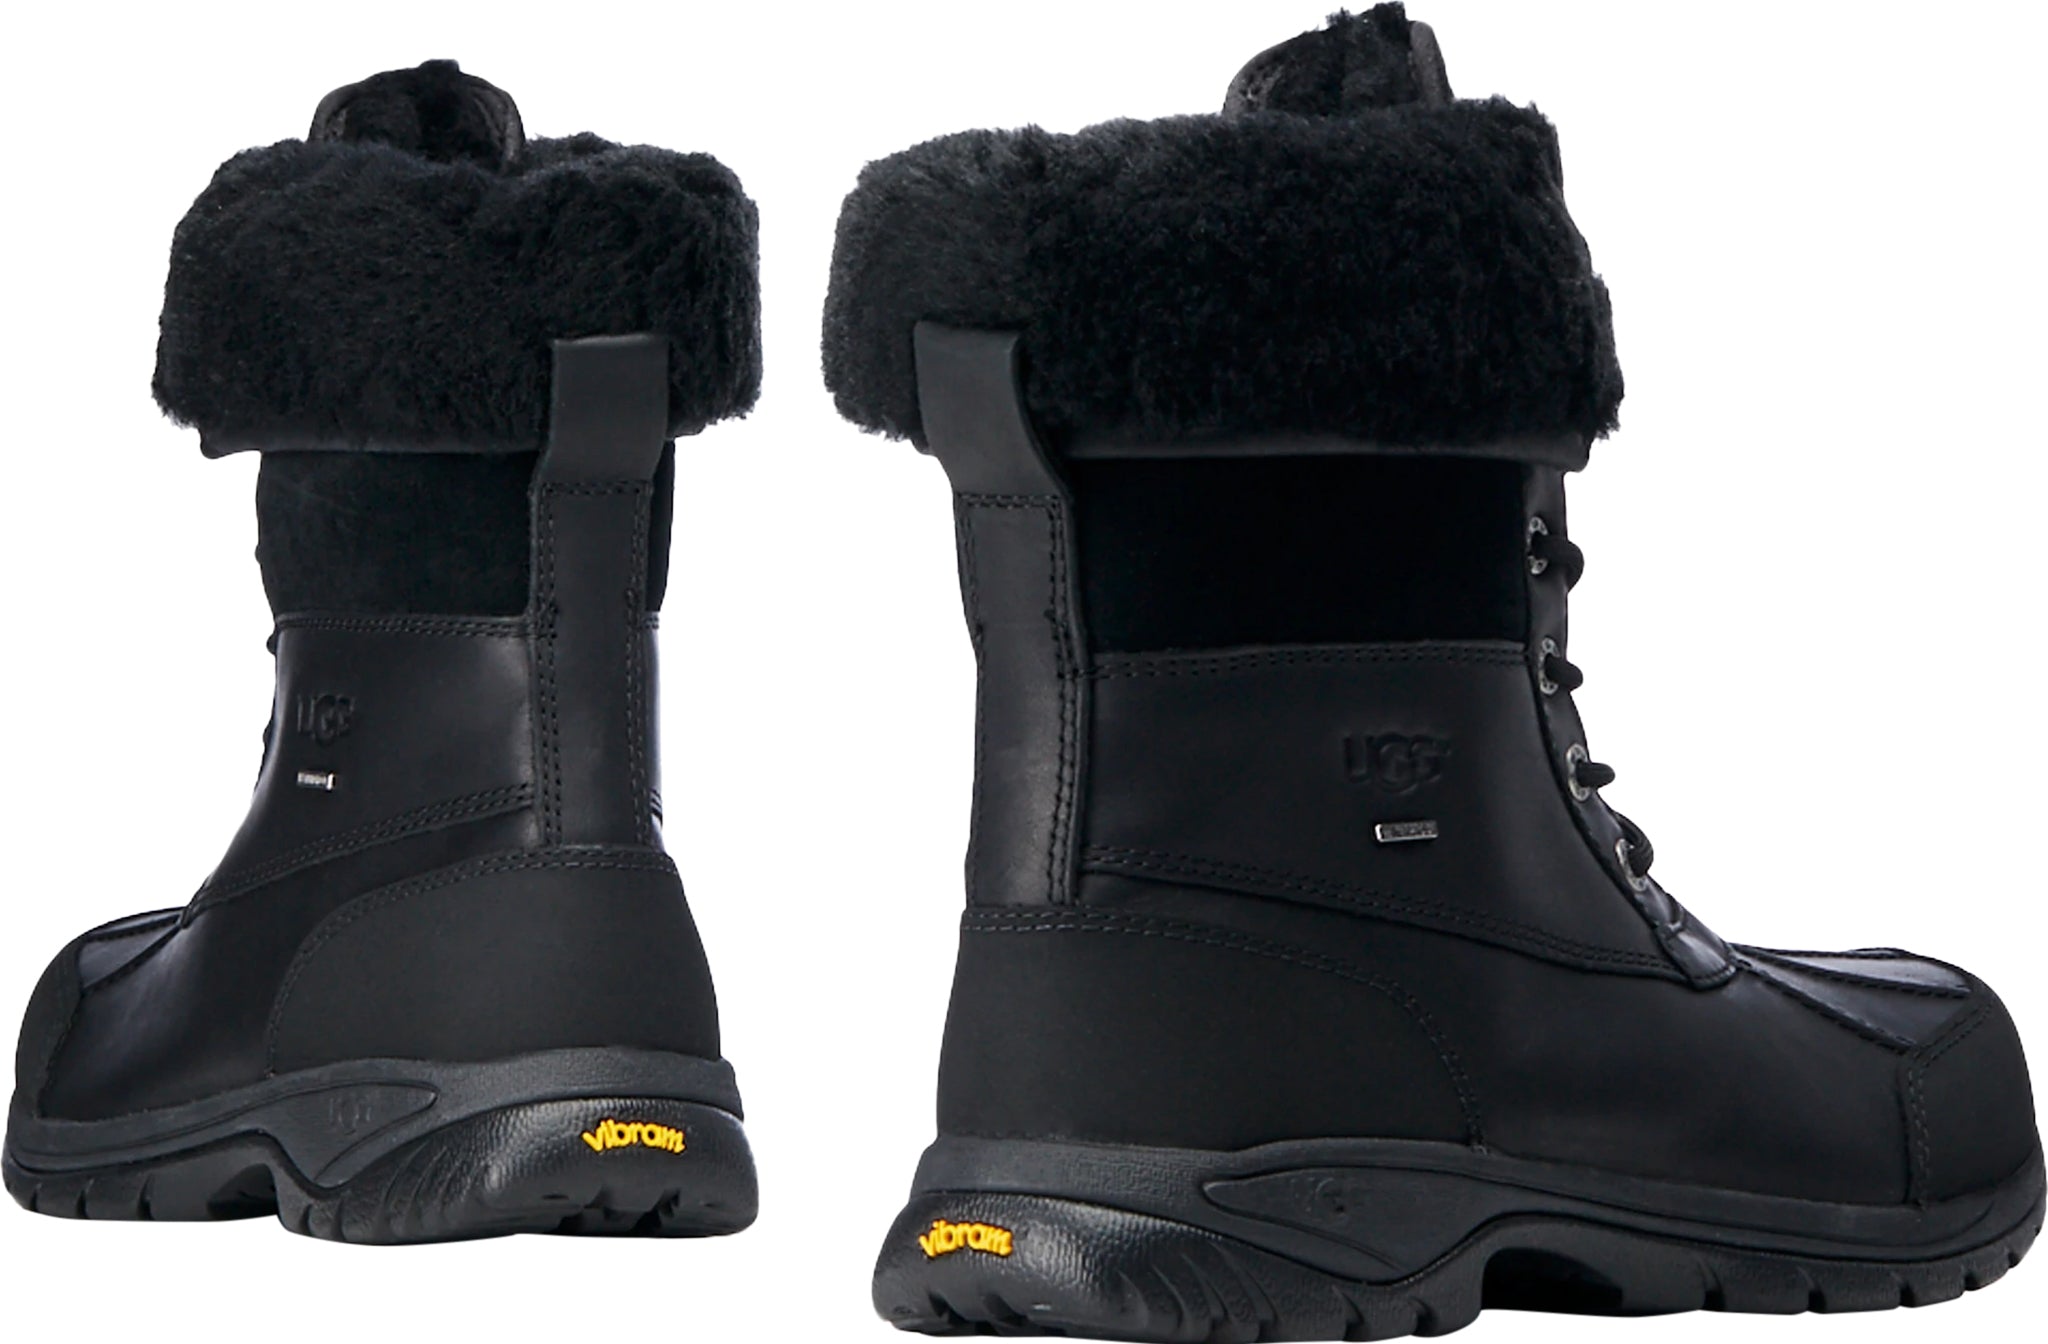 UGG Butte Boots - Men's | Altitude Sports